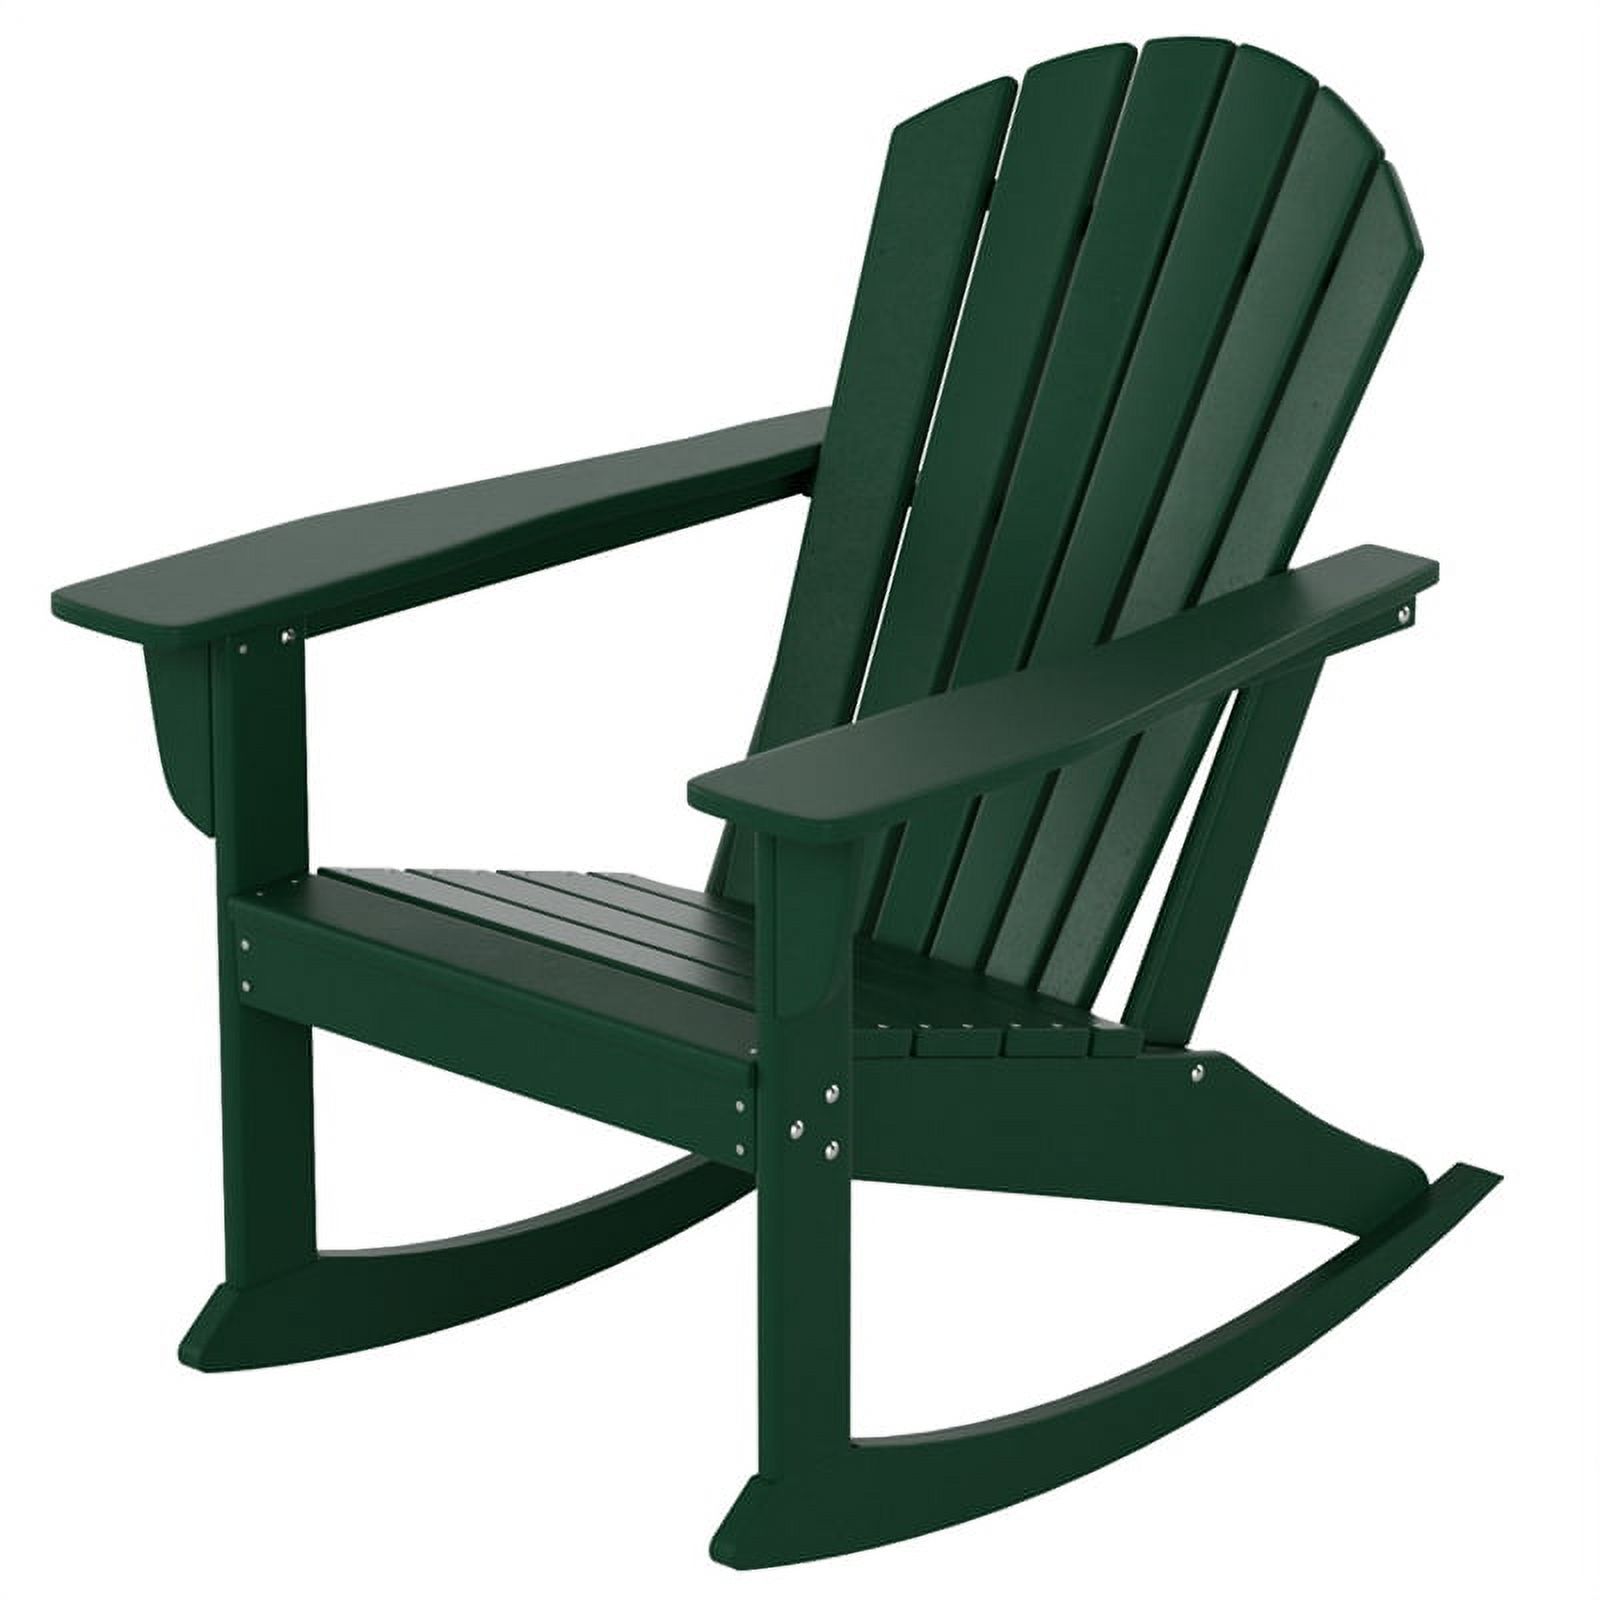 Portside Outdoor Poly Plastic Adirondack Rocking Chair - image 4 of 7